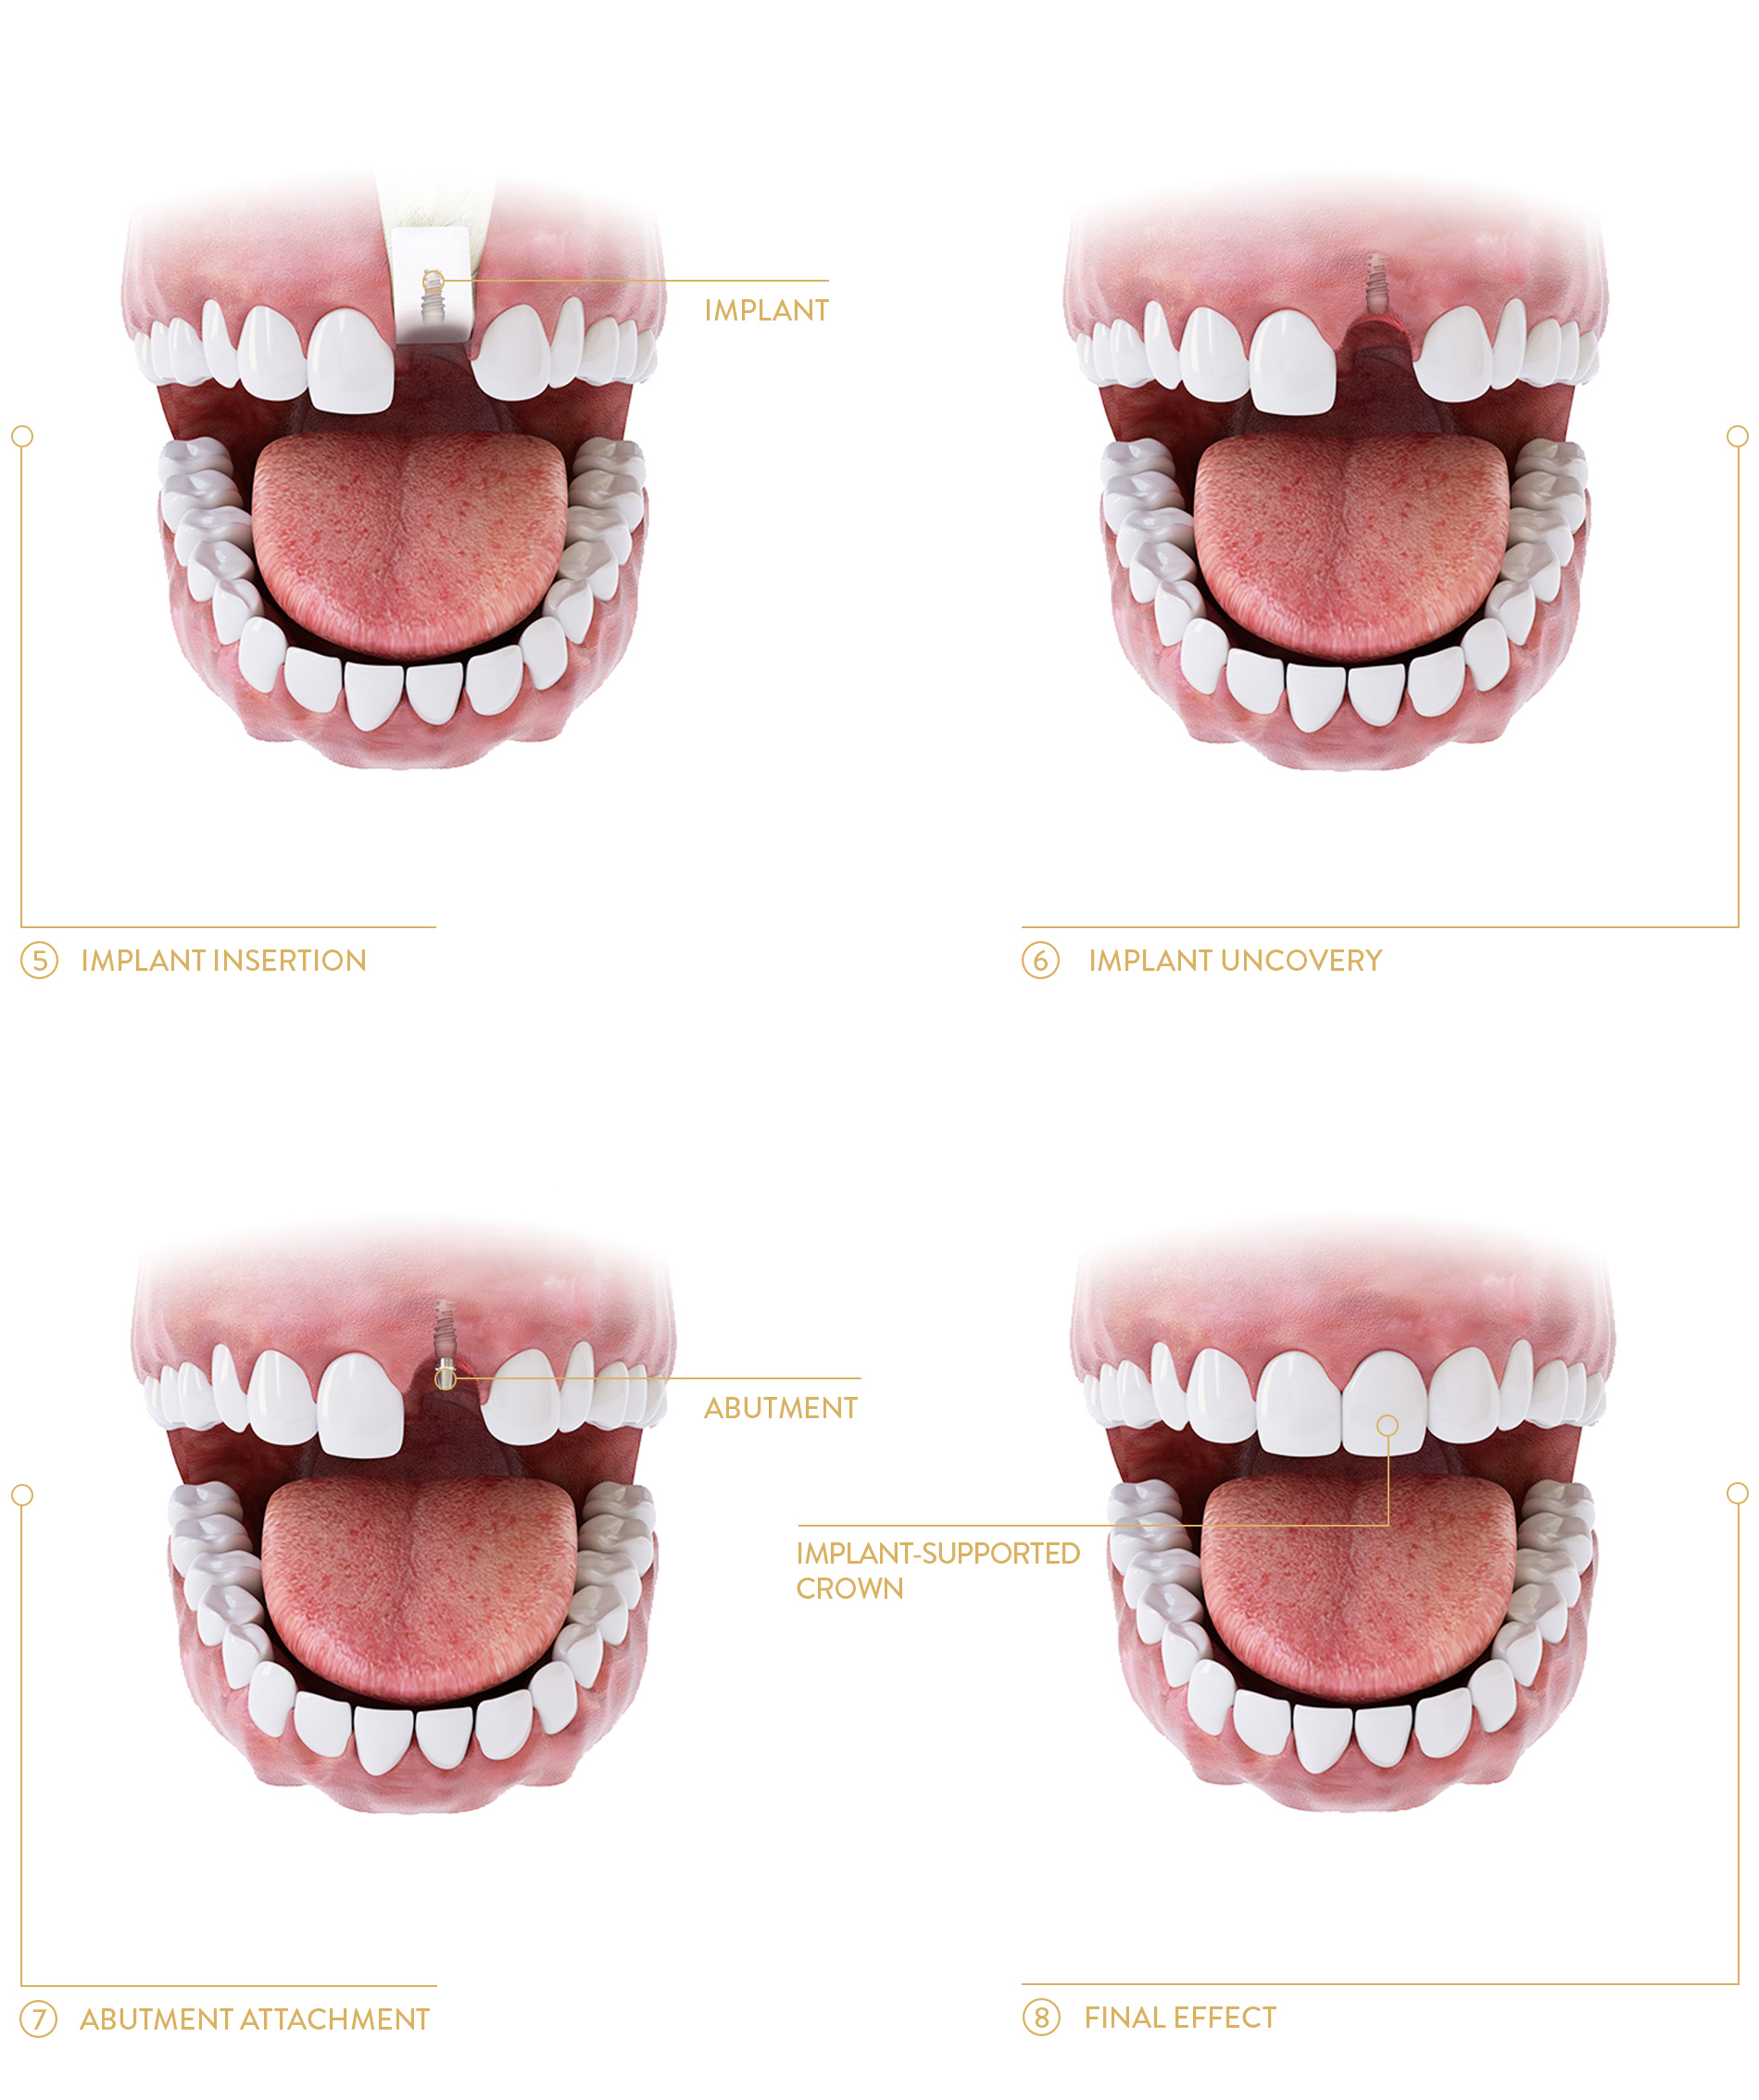 teeth implants poland, THE PROCESS OF IMPLANT-SUPPORTED PROSTHETIC TREATMENT WITH BONE reCONSTRUCTION